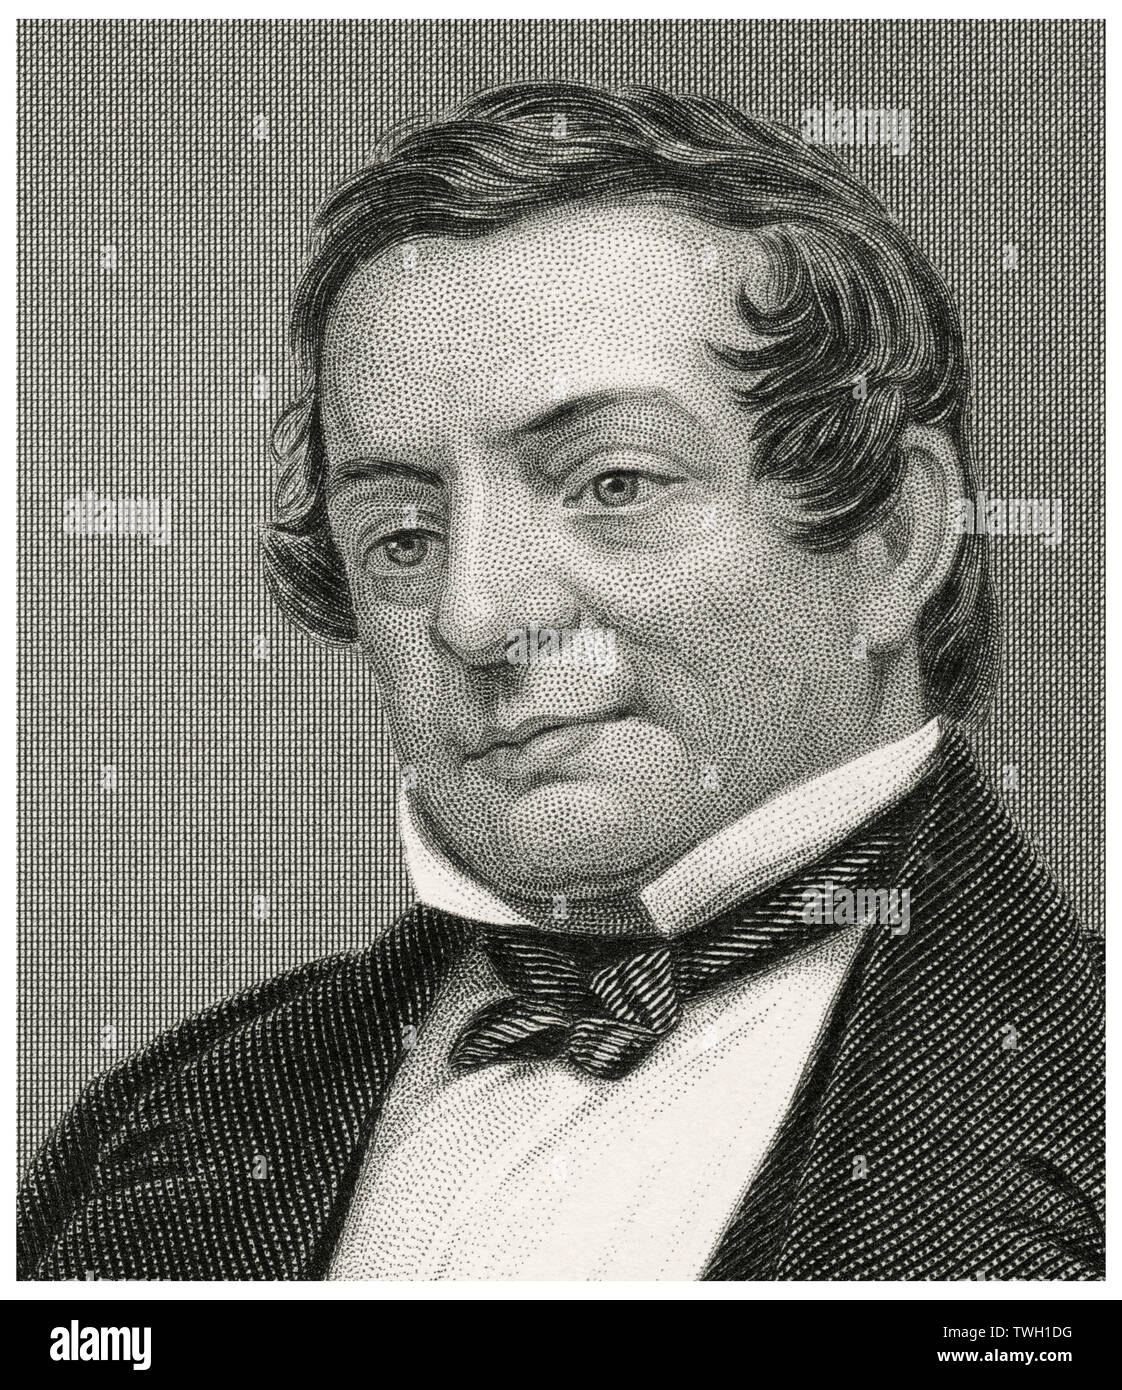 Washington Irving (1783-1859), American Writer and Diplomat, Head and Shoulders Portrait, Steel Engraving, Portrait Gallery of Eminent Men and Women of Europe and America by Evert A. Duyckinck, Published by Henry J. Johnson, Johnson, Wilson & Company, New York, 1873 Stock Photo